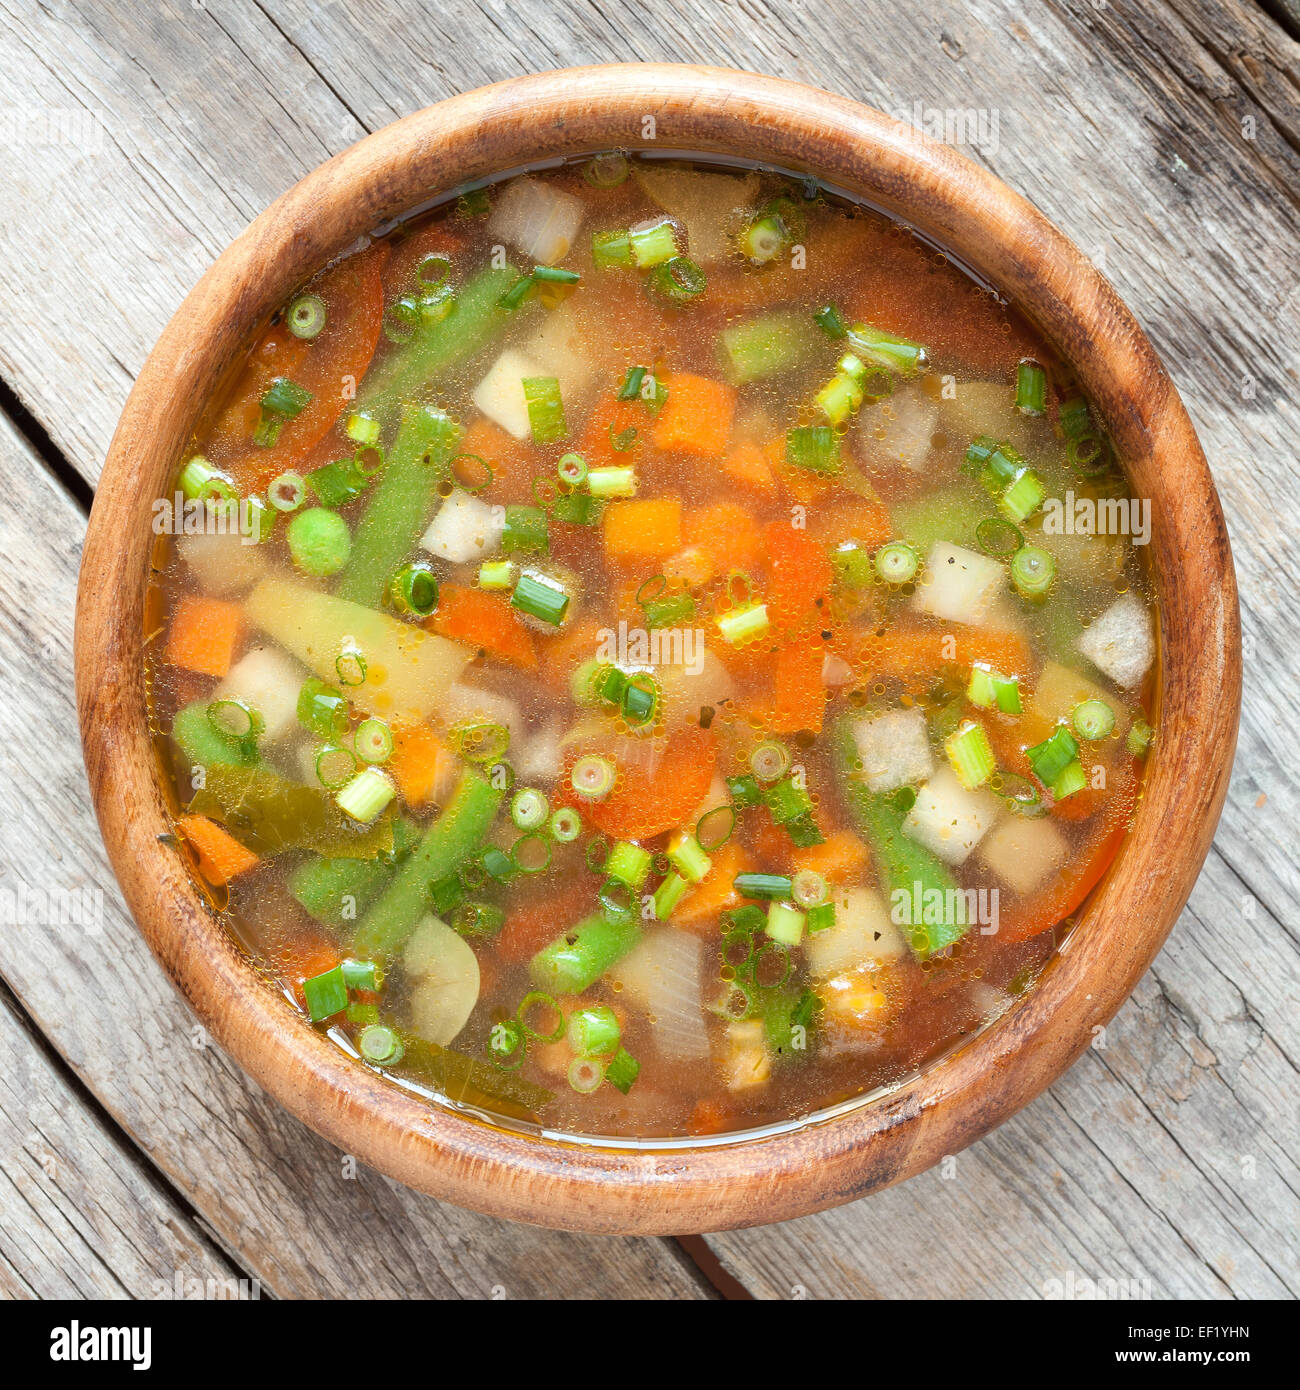 Close up view of a wooden table with a fresh, ready-to-eat homemade  vegetable soup. Stock Photo by lucigerma